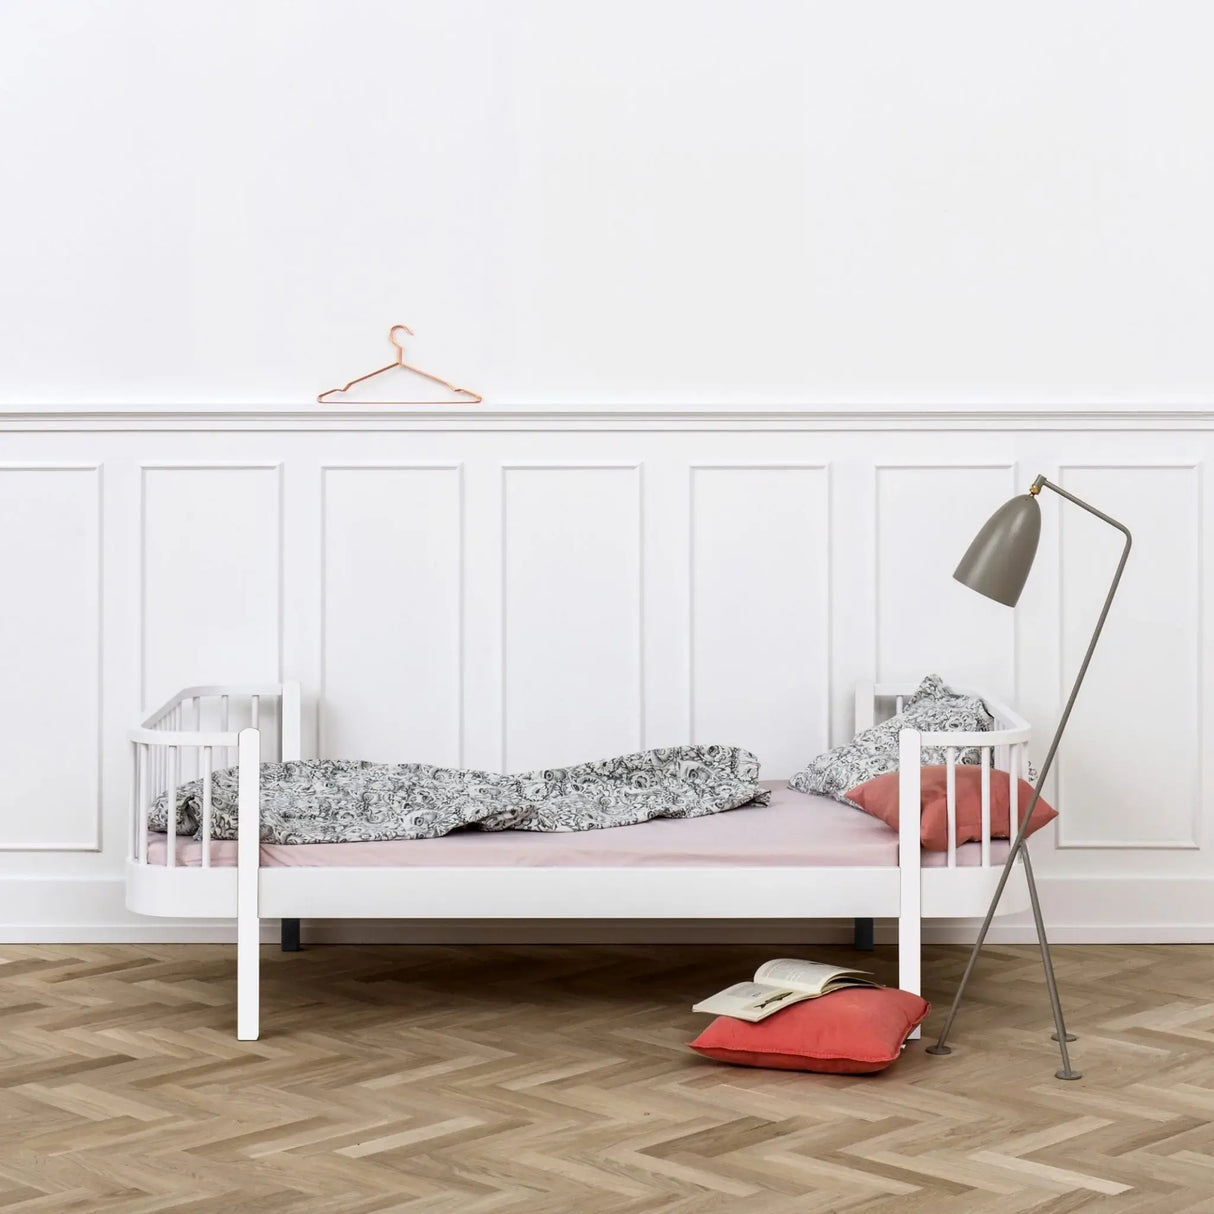 FREE Installation - Oliver Furniture Wood Original Single Bed in White - Little Snoozes